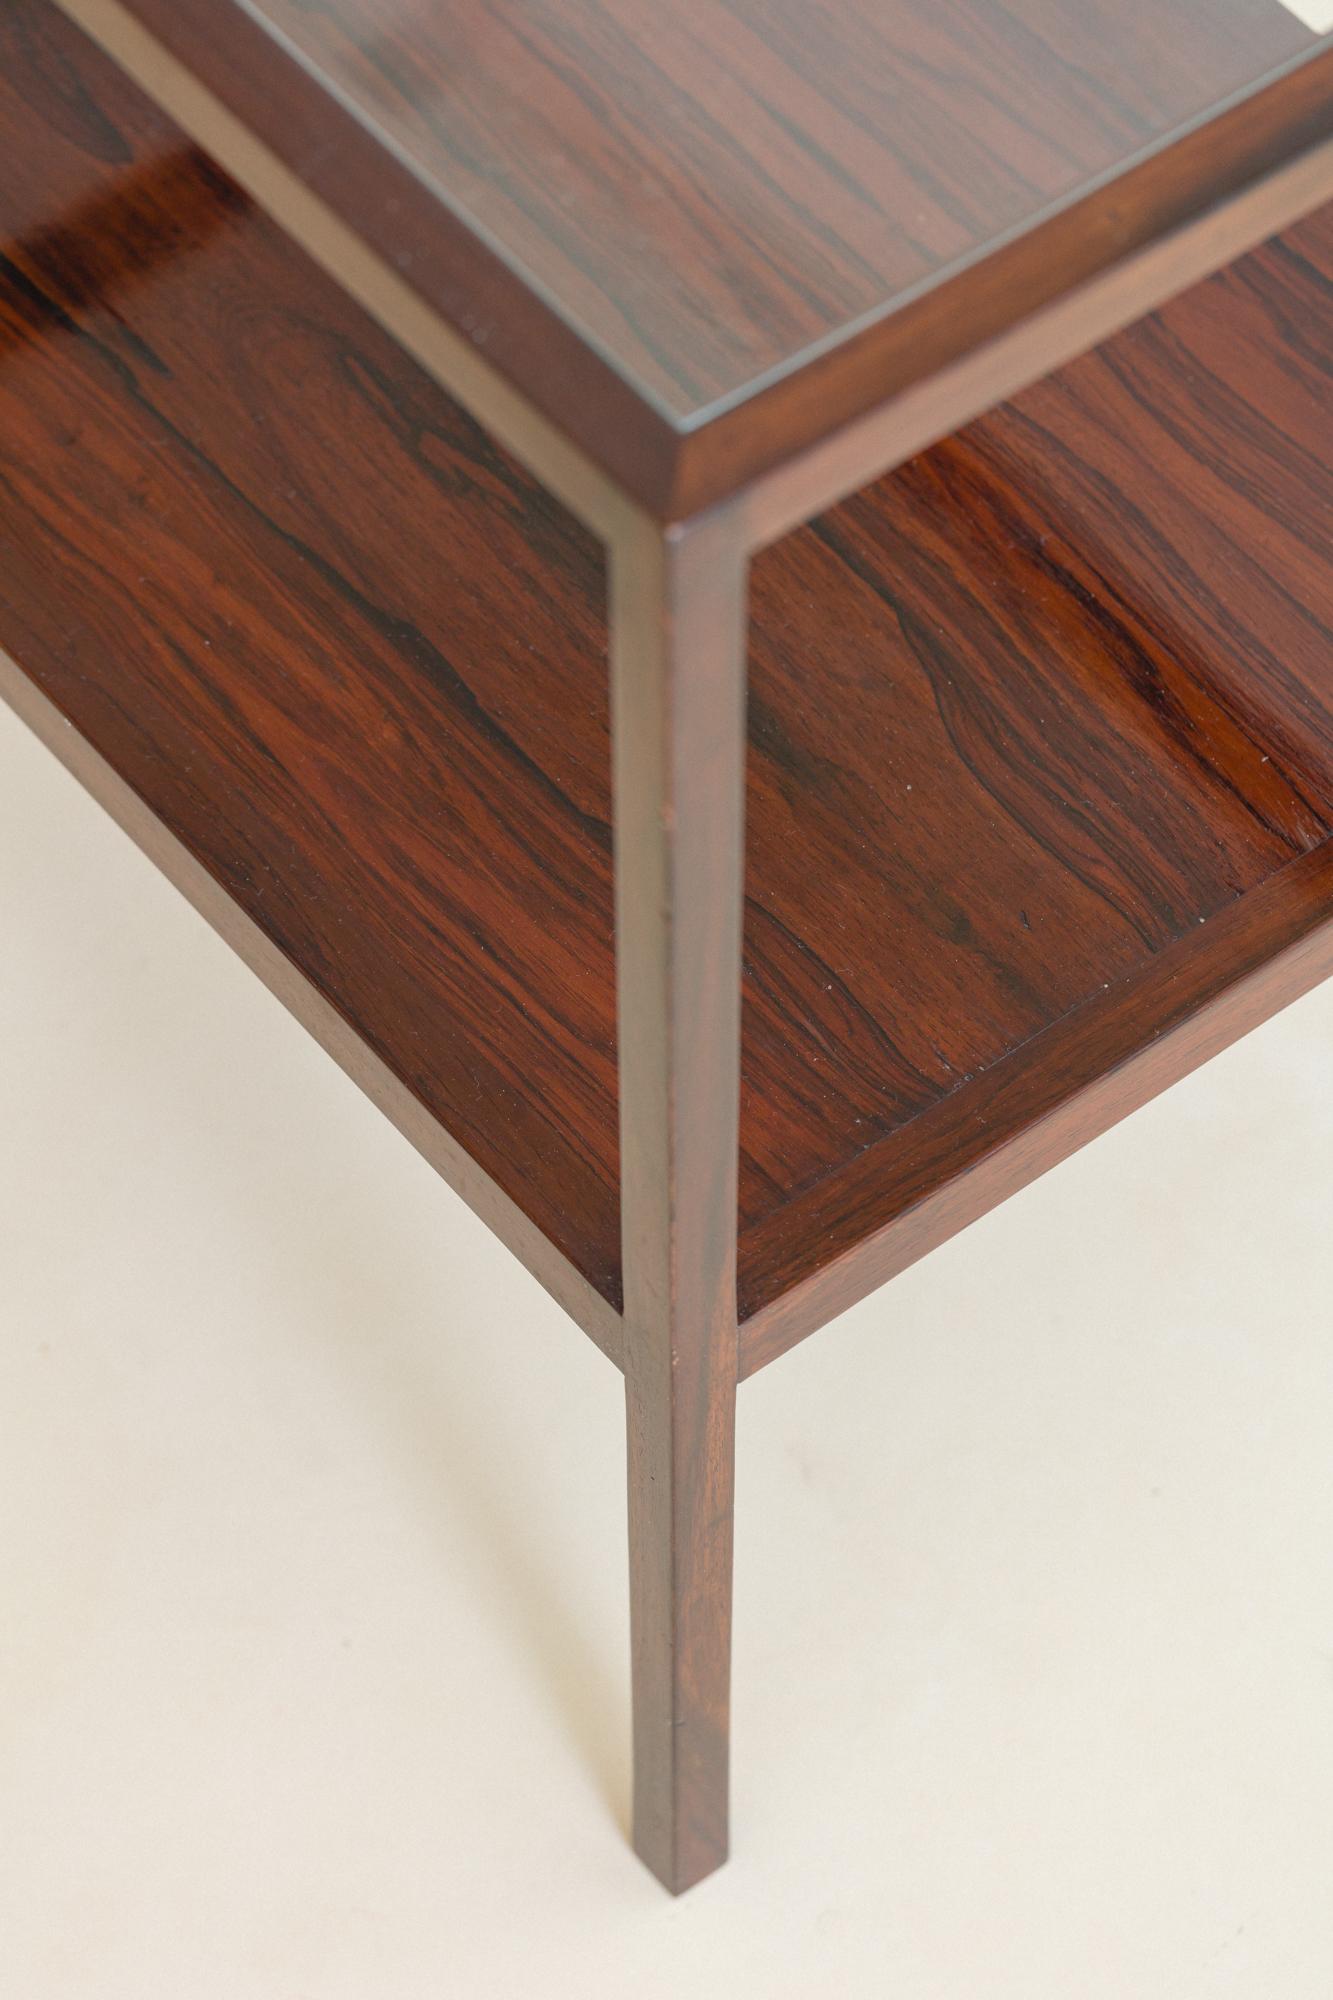 Brazilian Side Tables by Joaquim Tenreiro, Rosewood and Glass, Midcentury Brazil, c 1960 For Sale